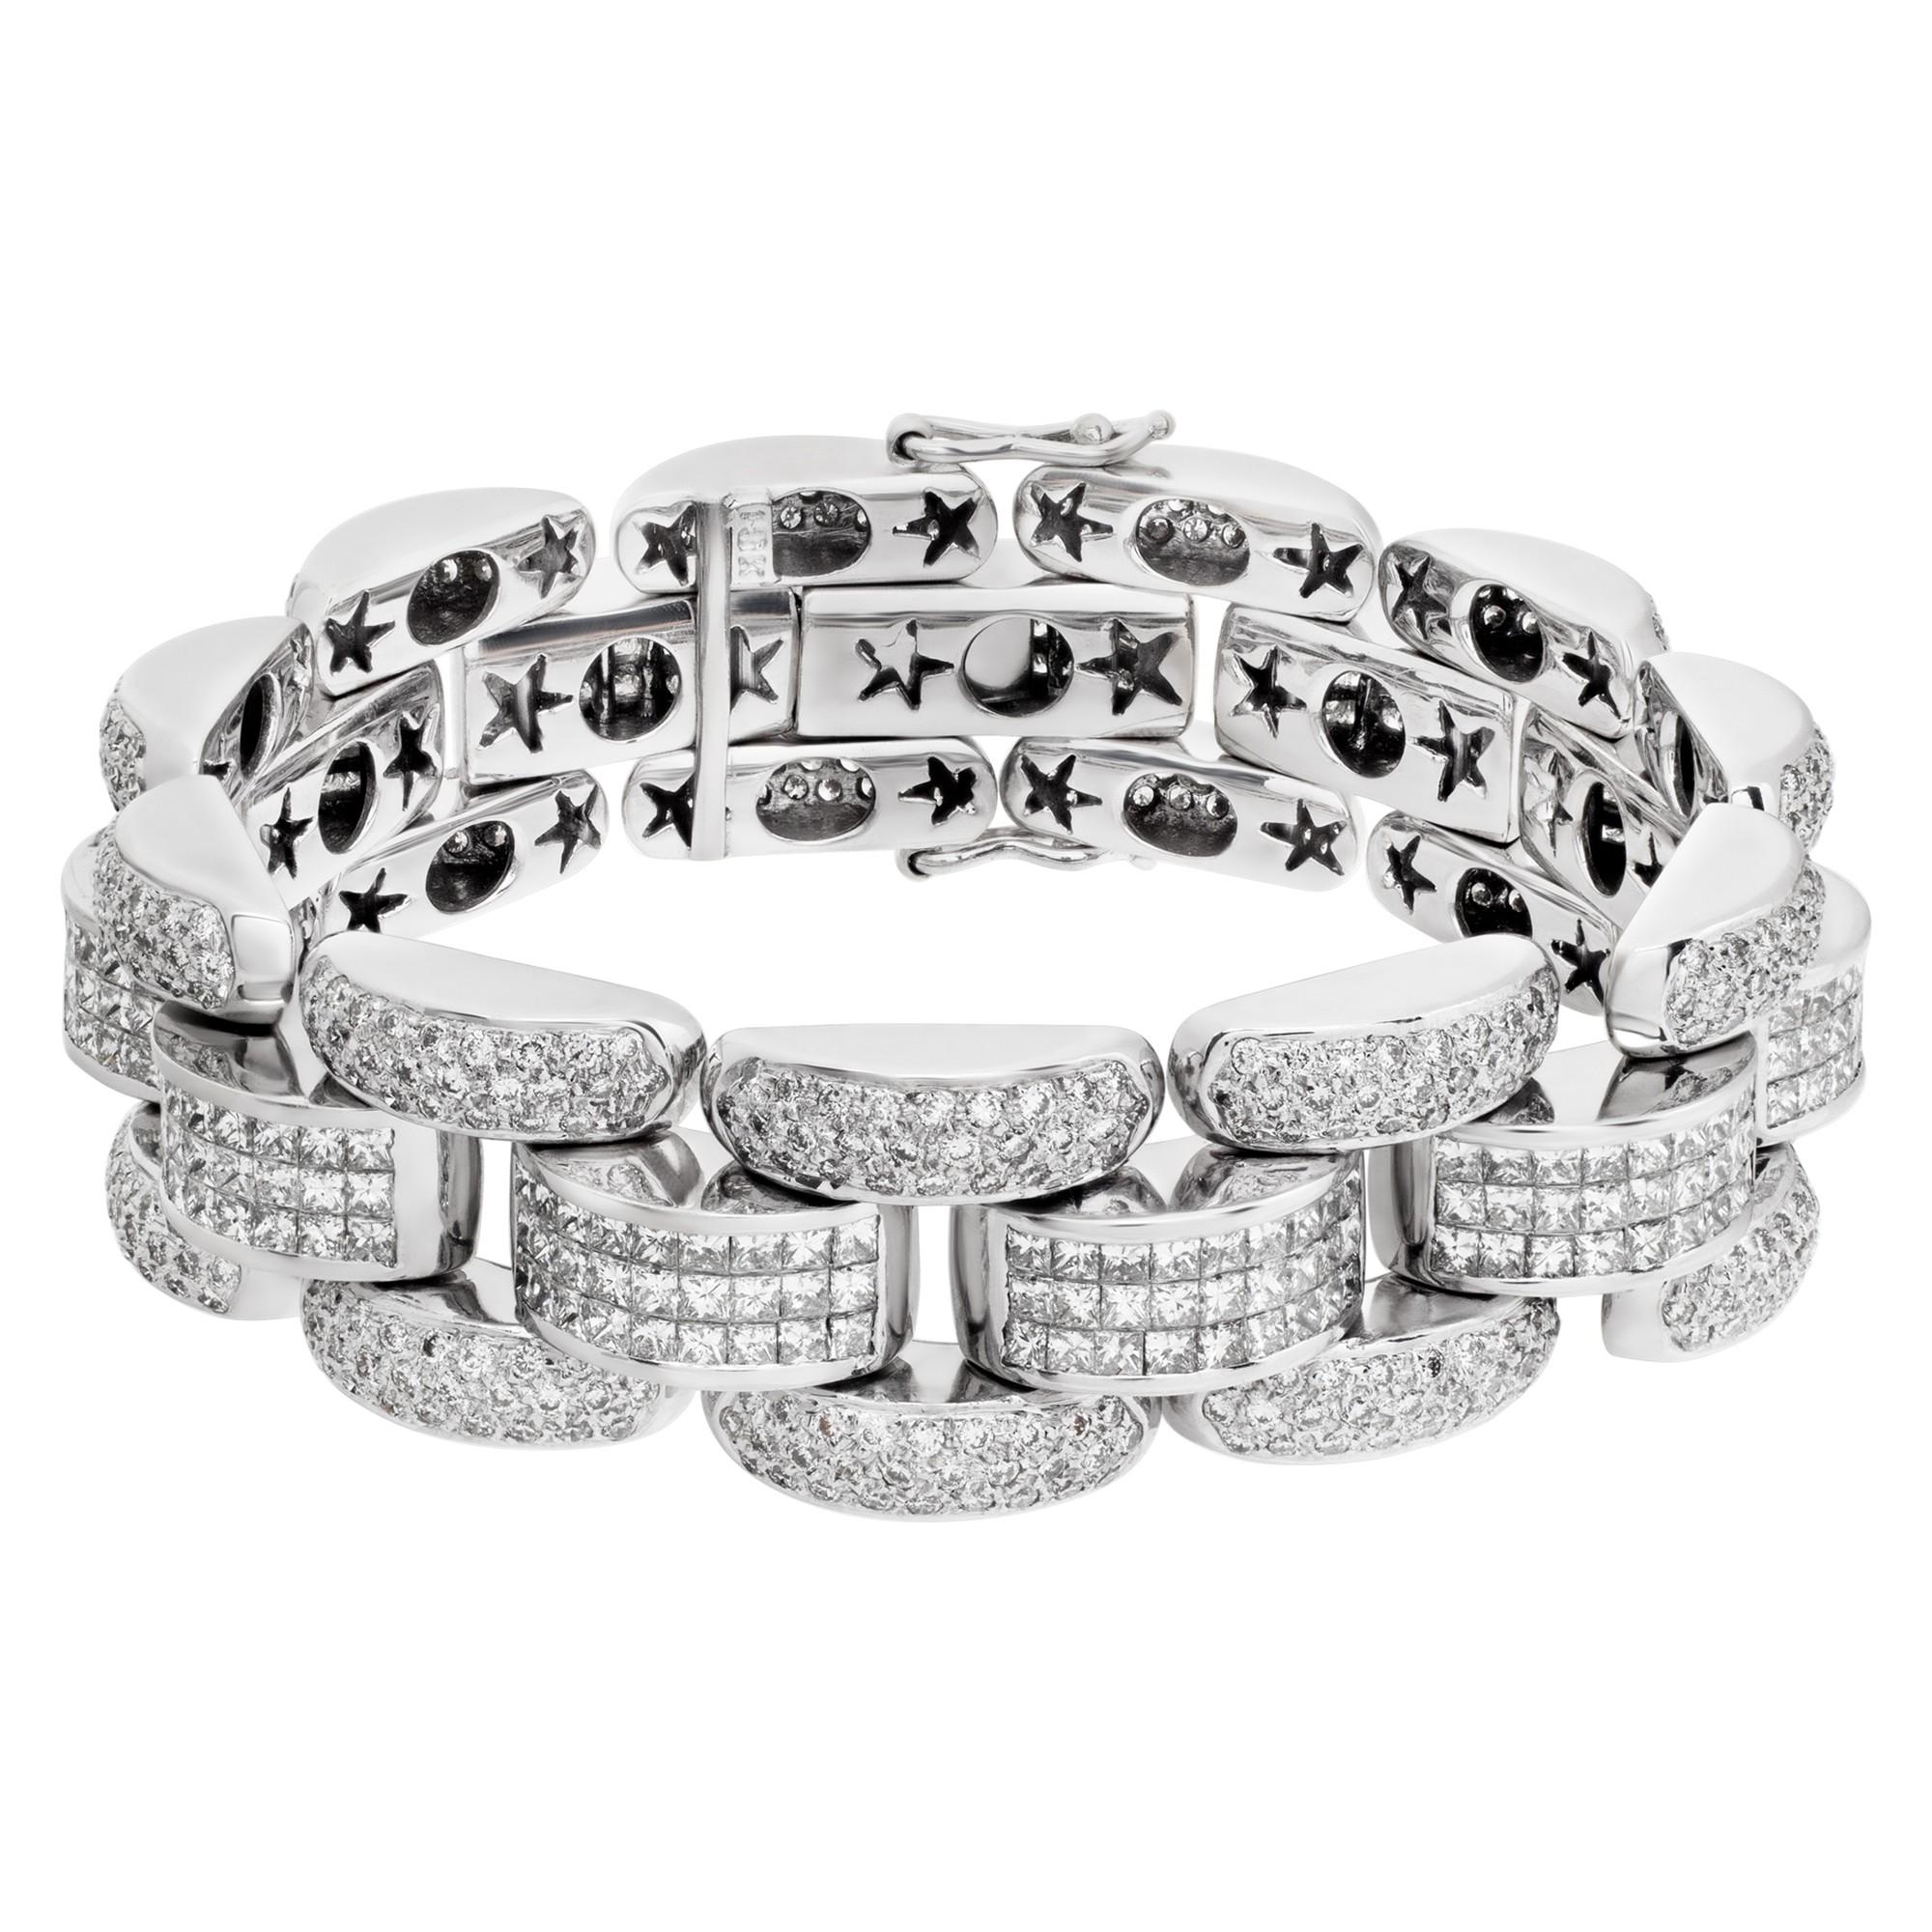 ESTIMATED RETAIL: $48,000.00
YOUR PRICE: $30,688.00

Link bracelet with invisible set princess and full round brilliant cut diamonds in 18k white gold totaling approximately 16 carats in F-G color, VS1 clarity diamonds. 
Width: 17mm 
Length: 7.5